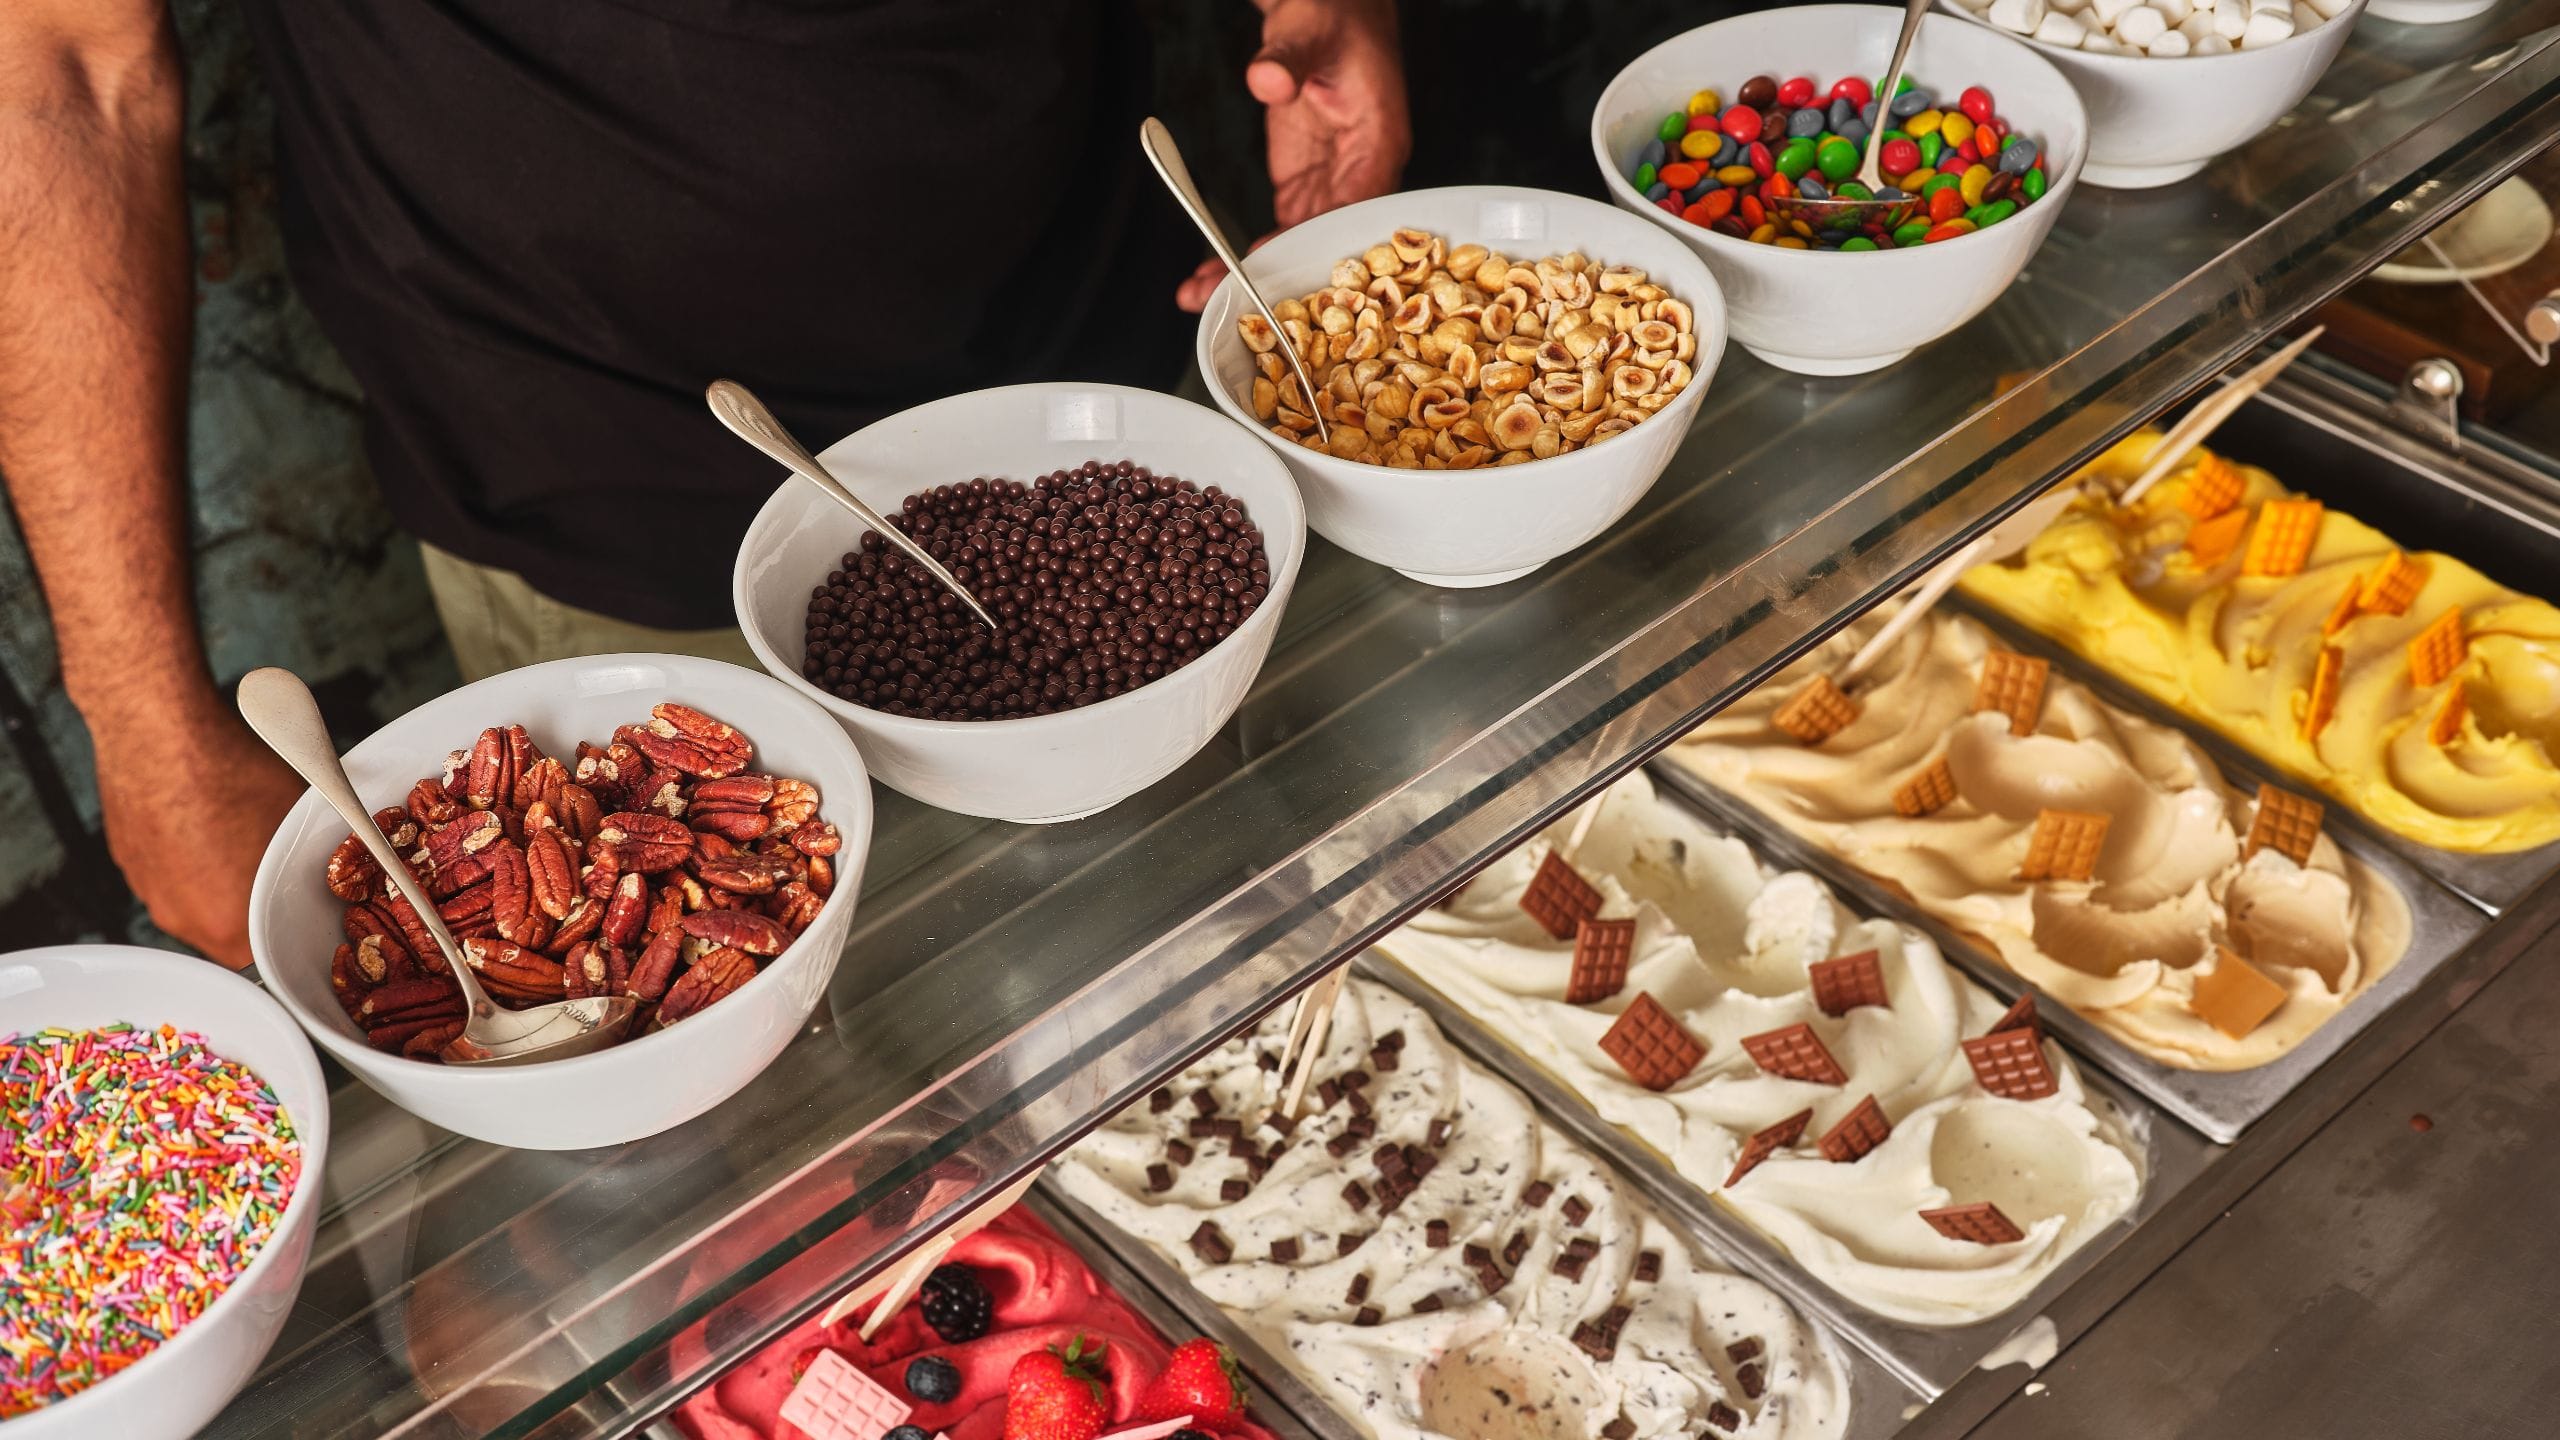 Global Ice Cream Bar Selection With Toppings